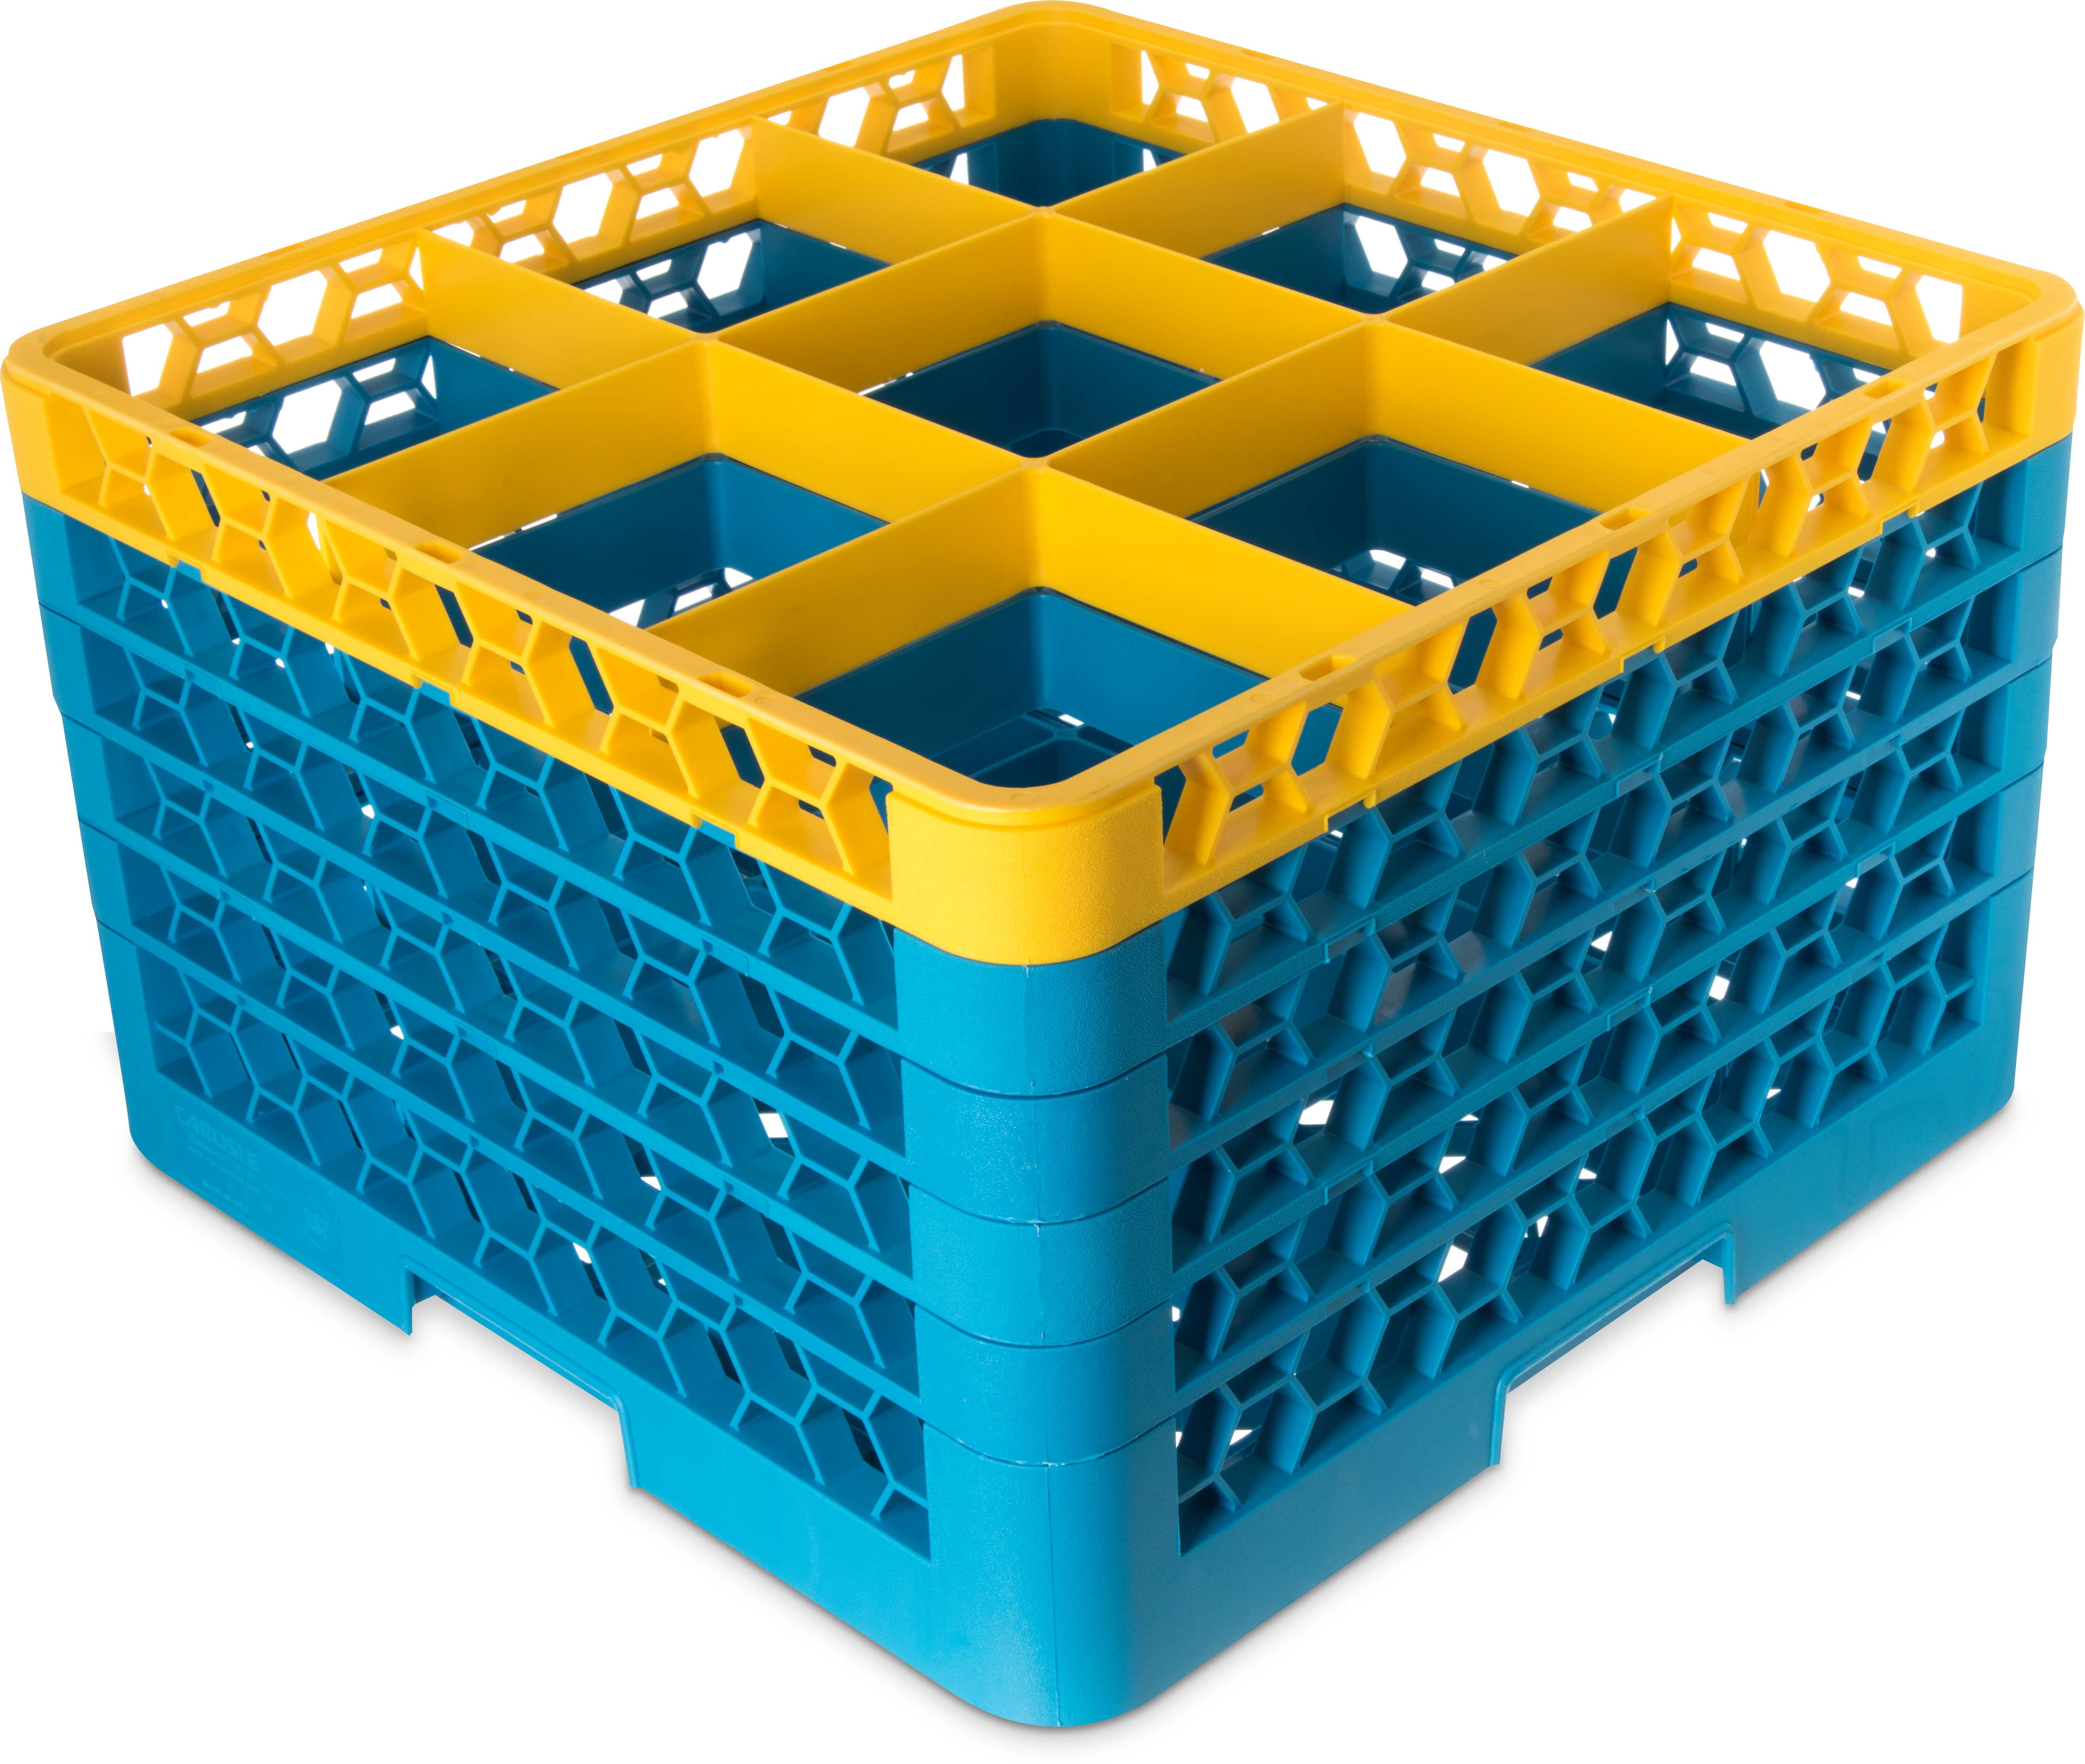 OptiClean 9 Compartment Glass Rack with 5 Extenders 11.9 - Yellow-Carlisle Blue